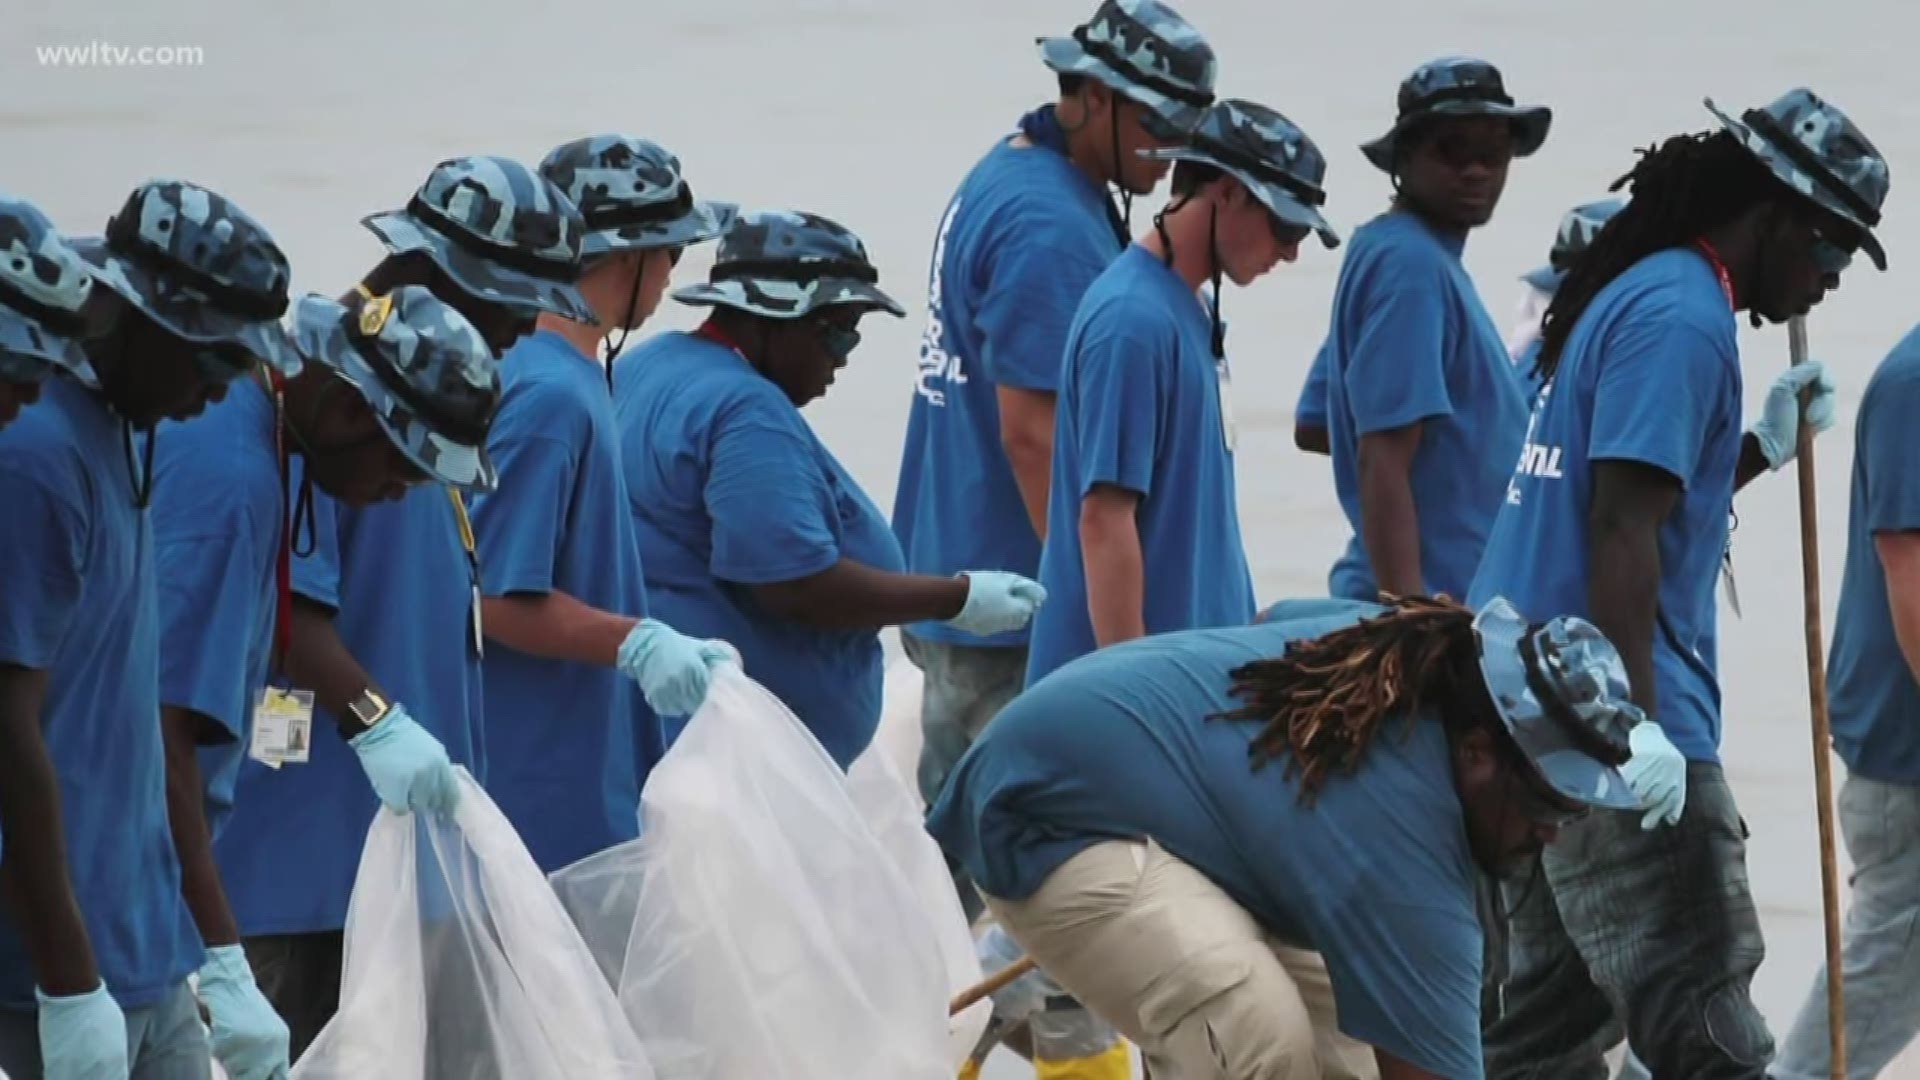 bp oil spill cleanup workers dying